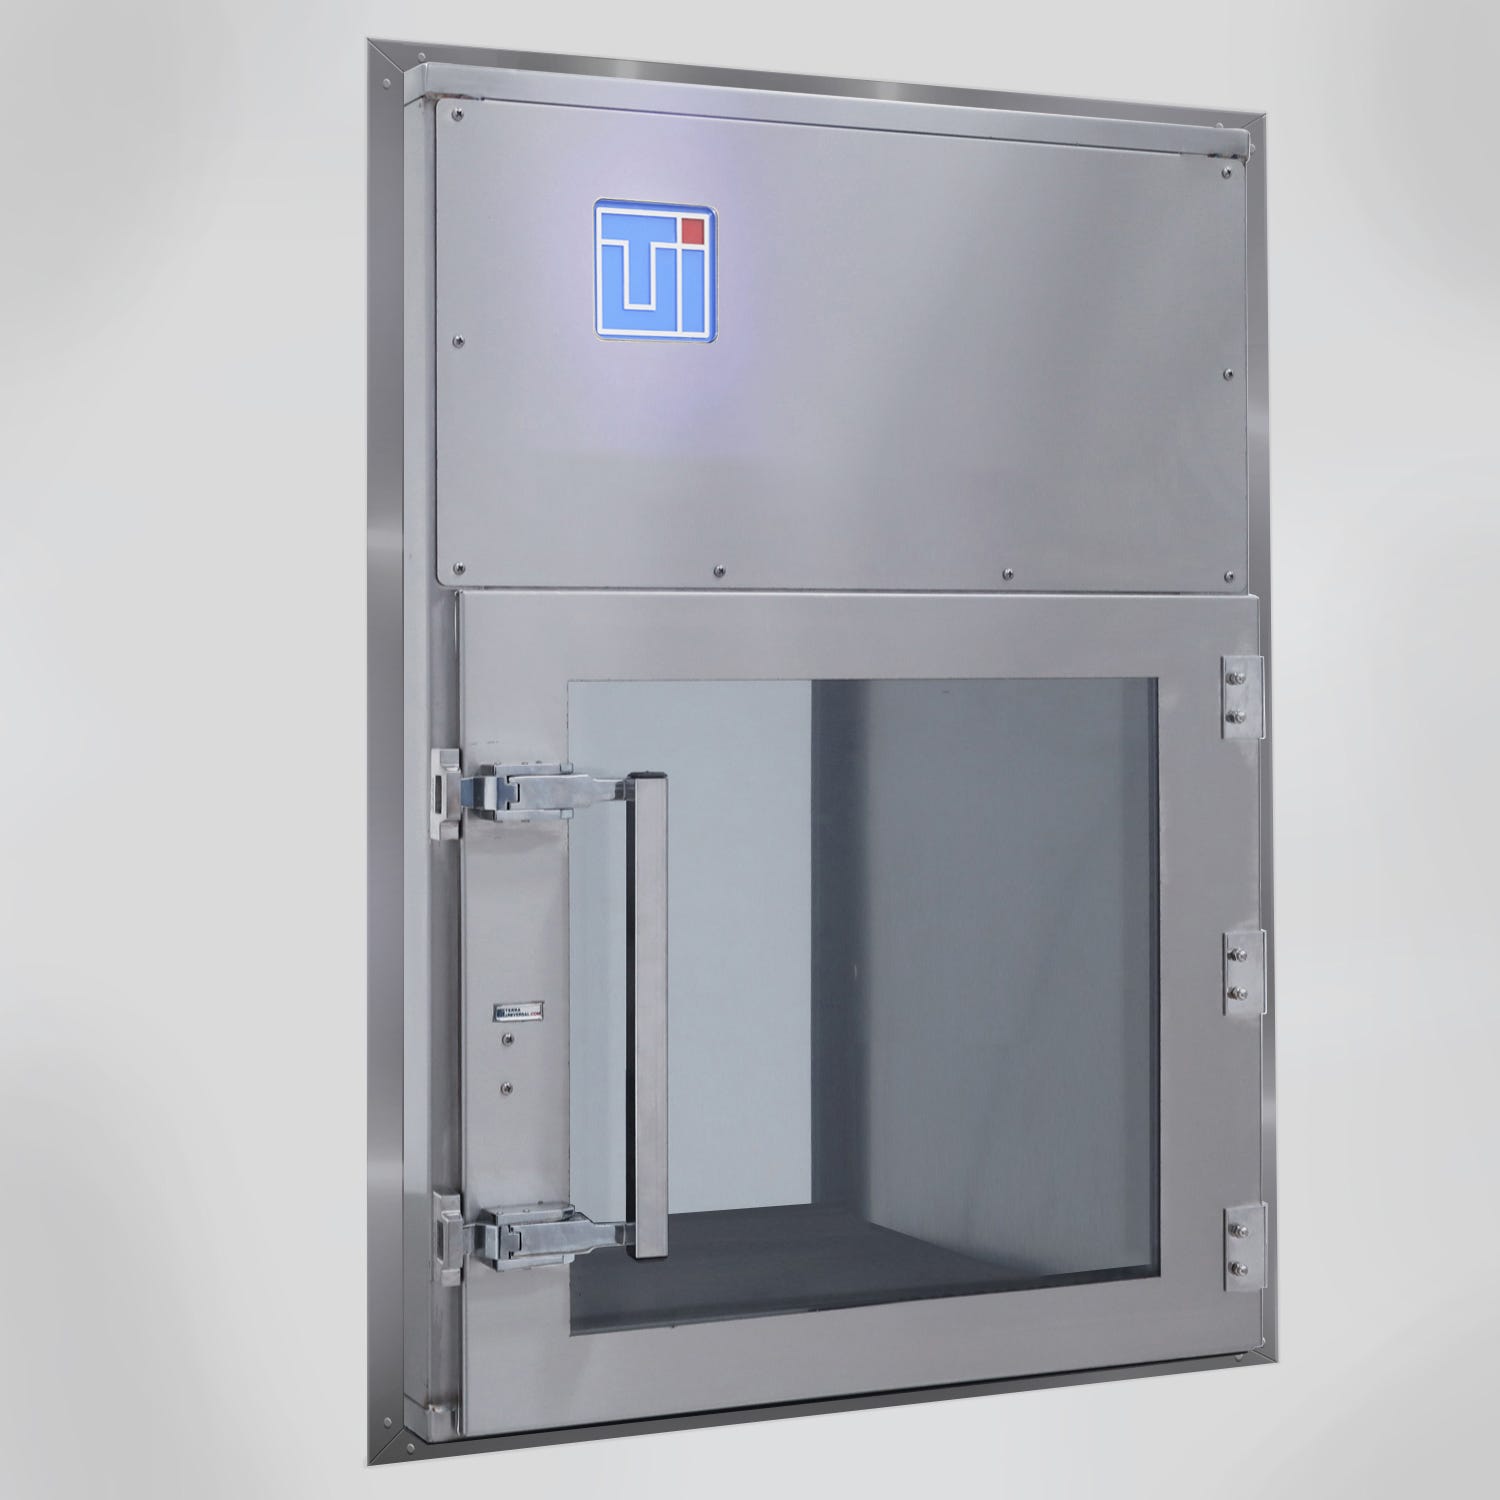 Wall-mounted HEPA-filtered pass-through in 304 stainless steel